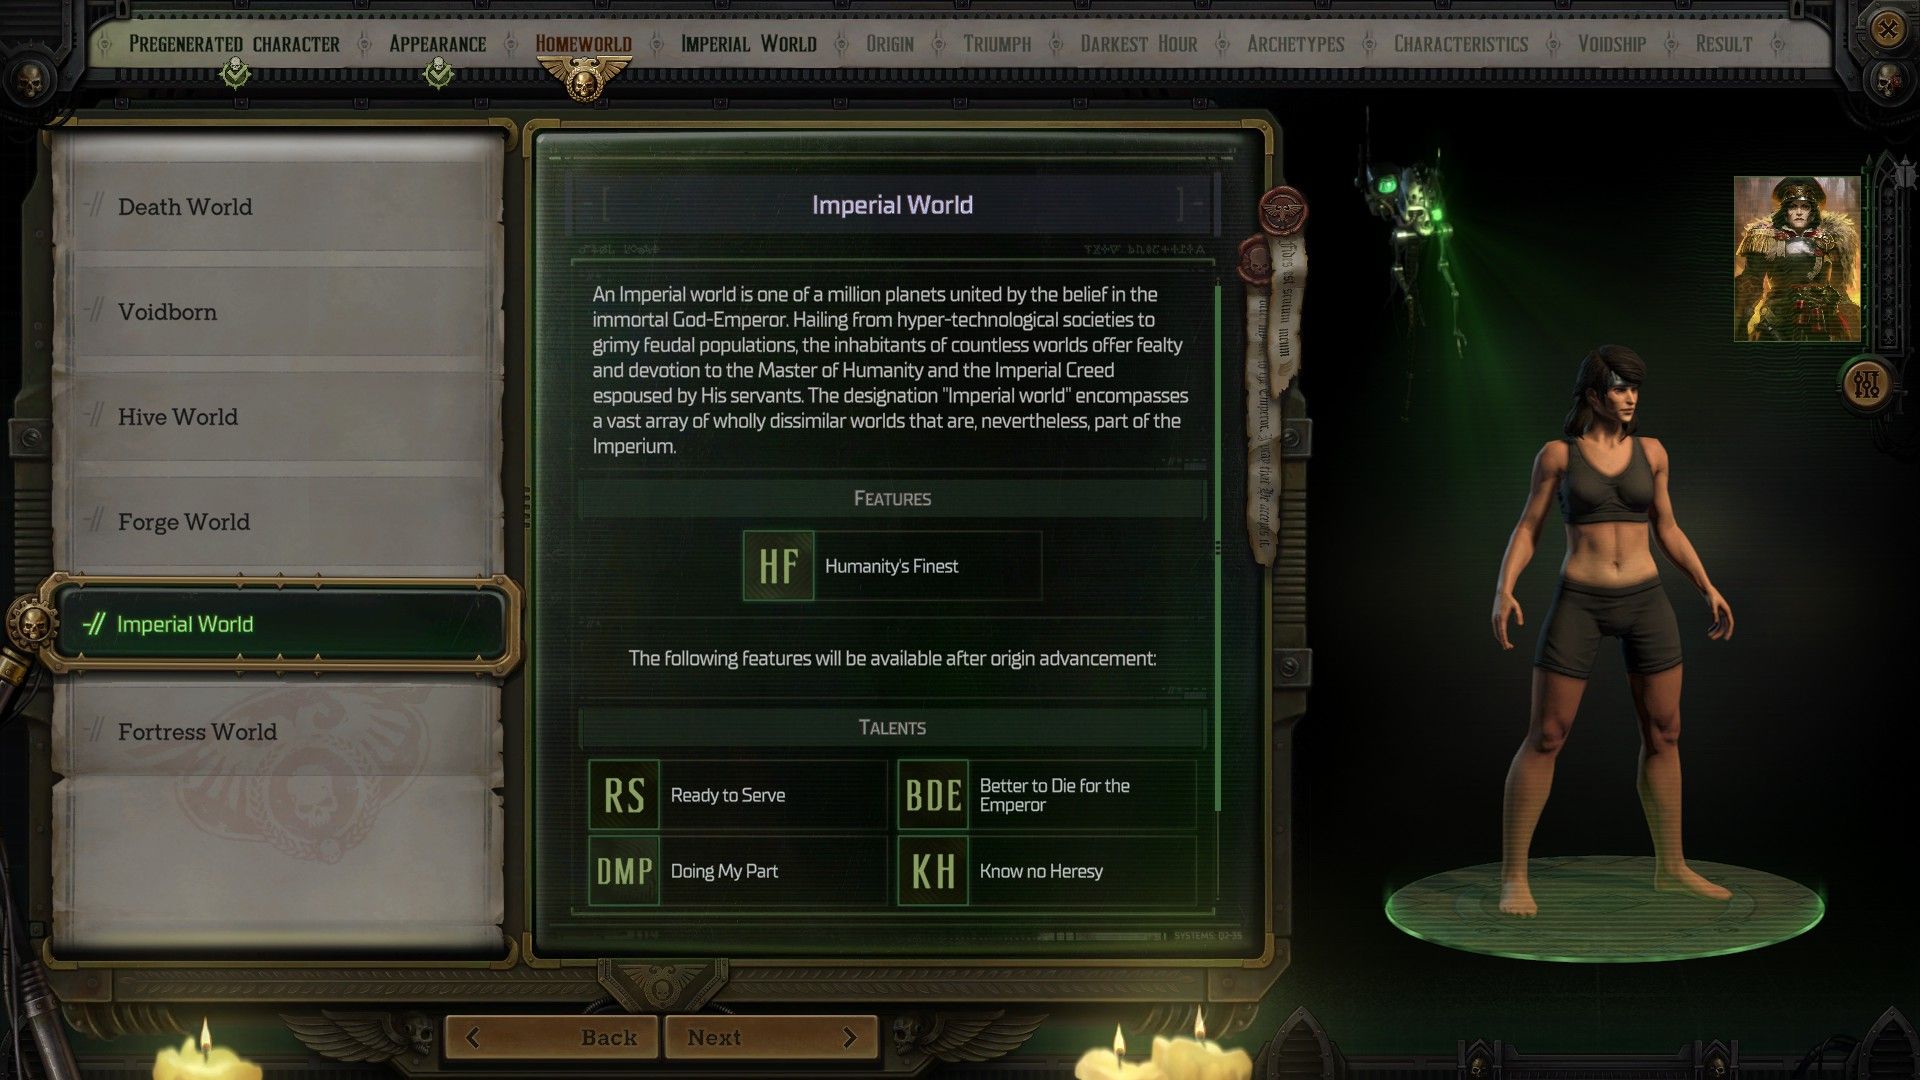 the imperial world selection on the character creation interface in warhammer 40k rogue trader